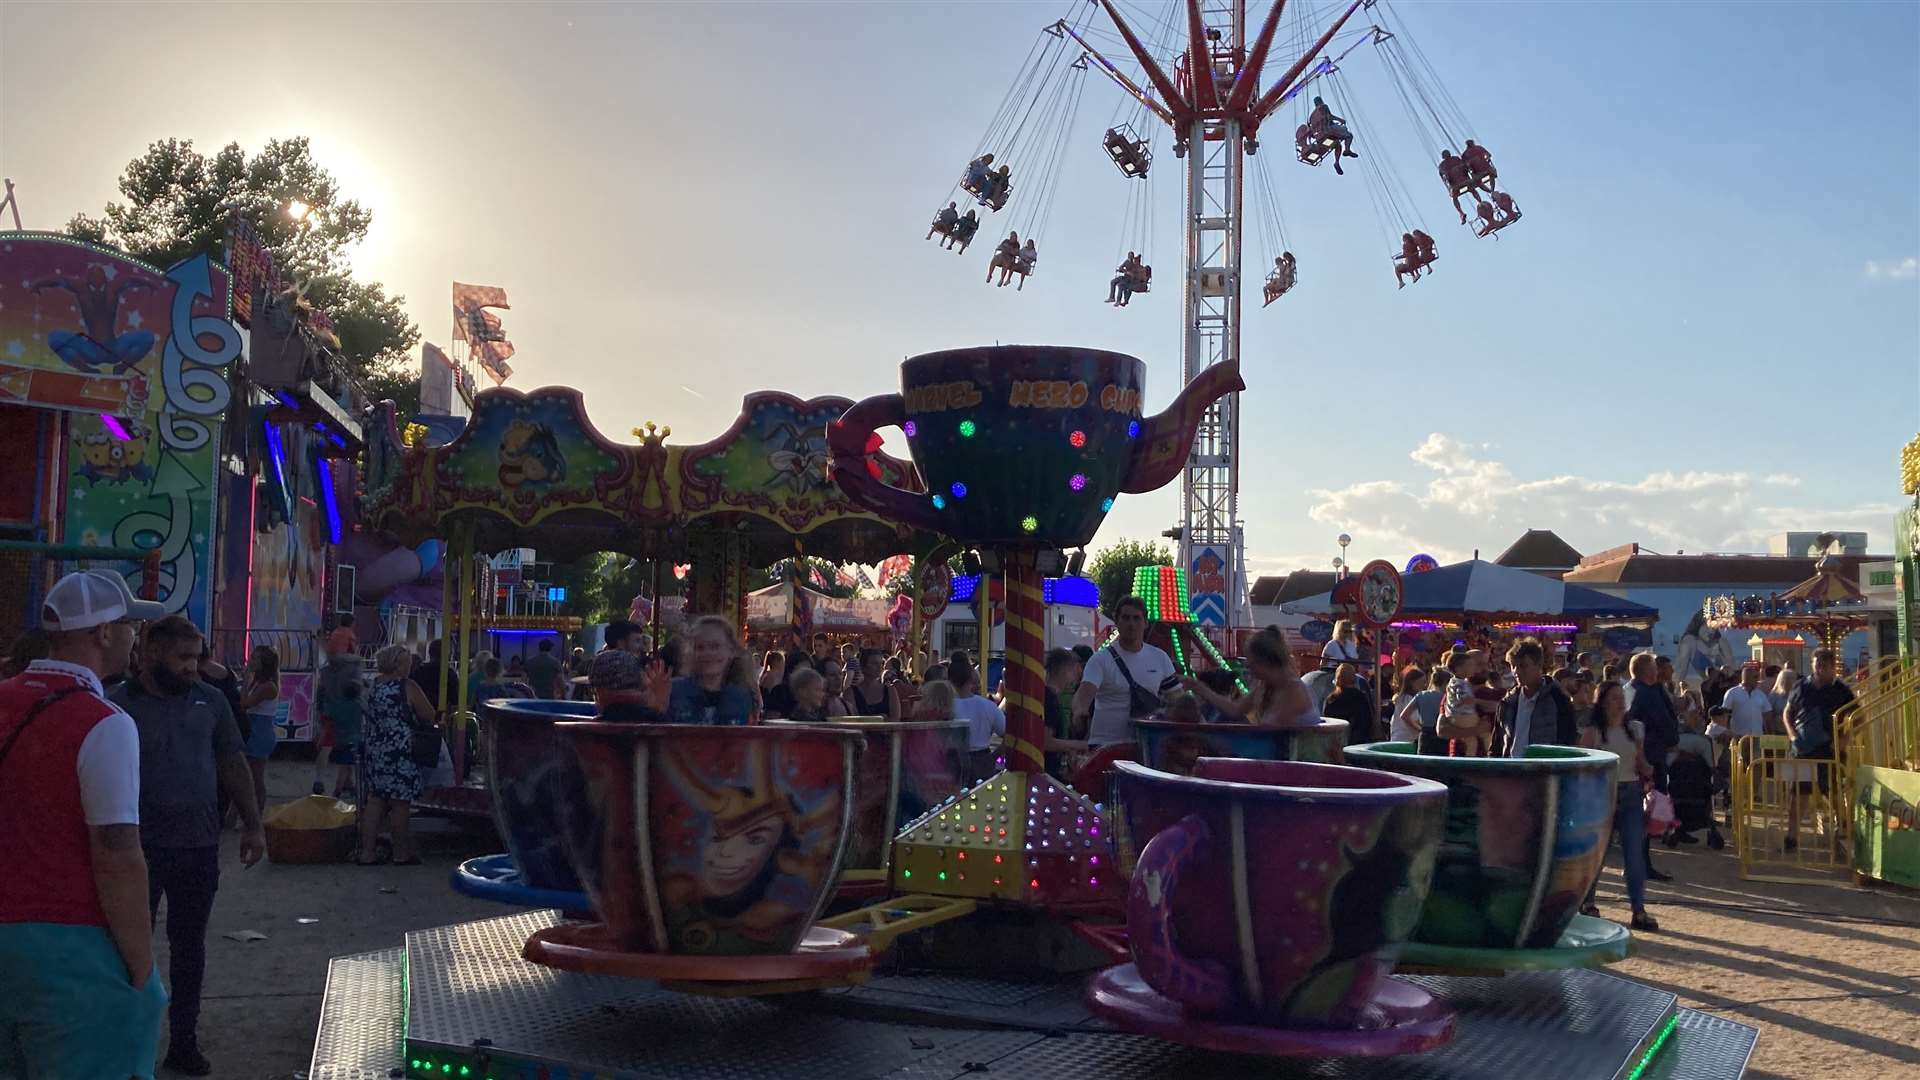 All the fun of the fair at the Sheppey summer carnival in Sheerness on Saturday